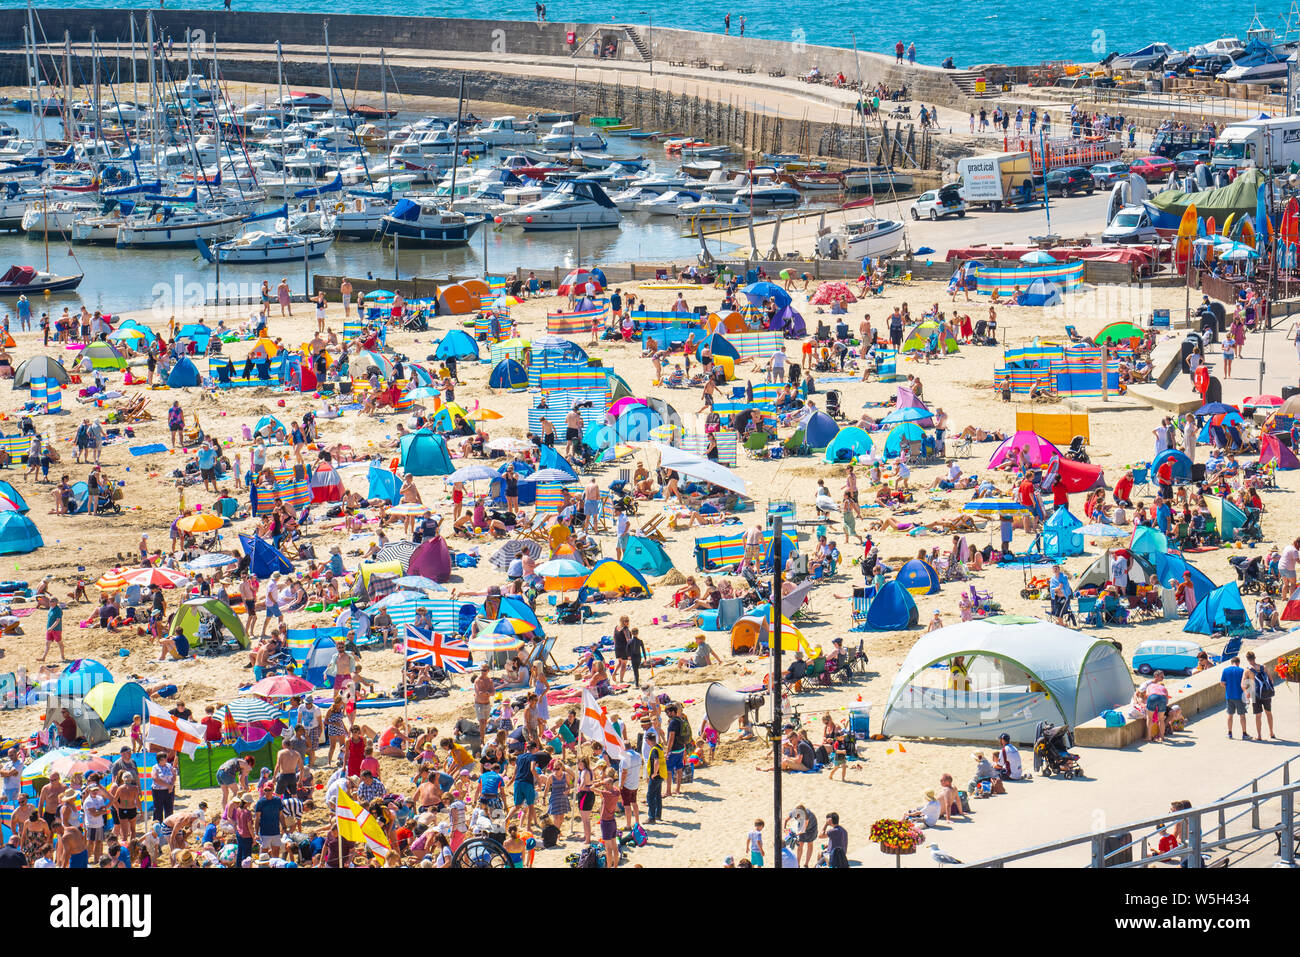 Lyme Regis, Dorset, UK. 29th July 2019. UK Weather: Another scorching hot start to the week at the picturesque seaside resort of Lyme Regis. Crowds of holidaymakers  and families pack out the beach to make the best of the baking hot sunshine over RNLI and Regatta week.  Credit: Celia McMahon/Alamy Live News. Stock Photo